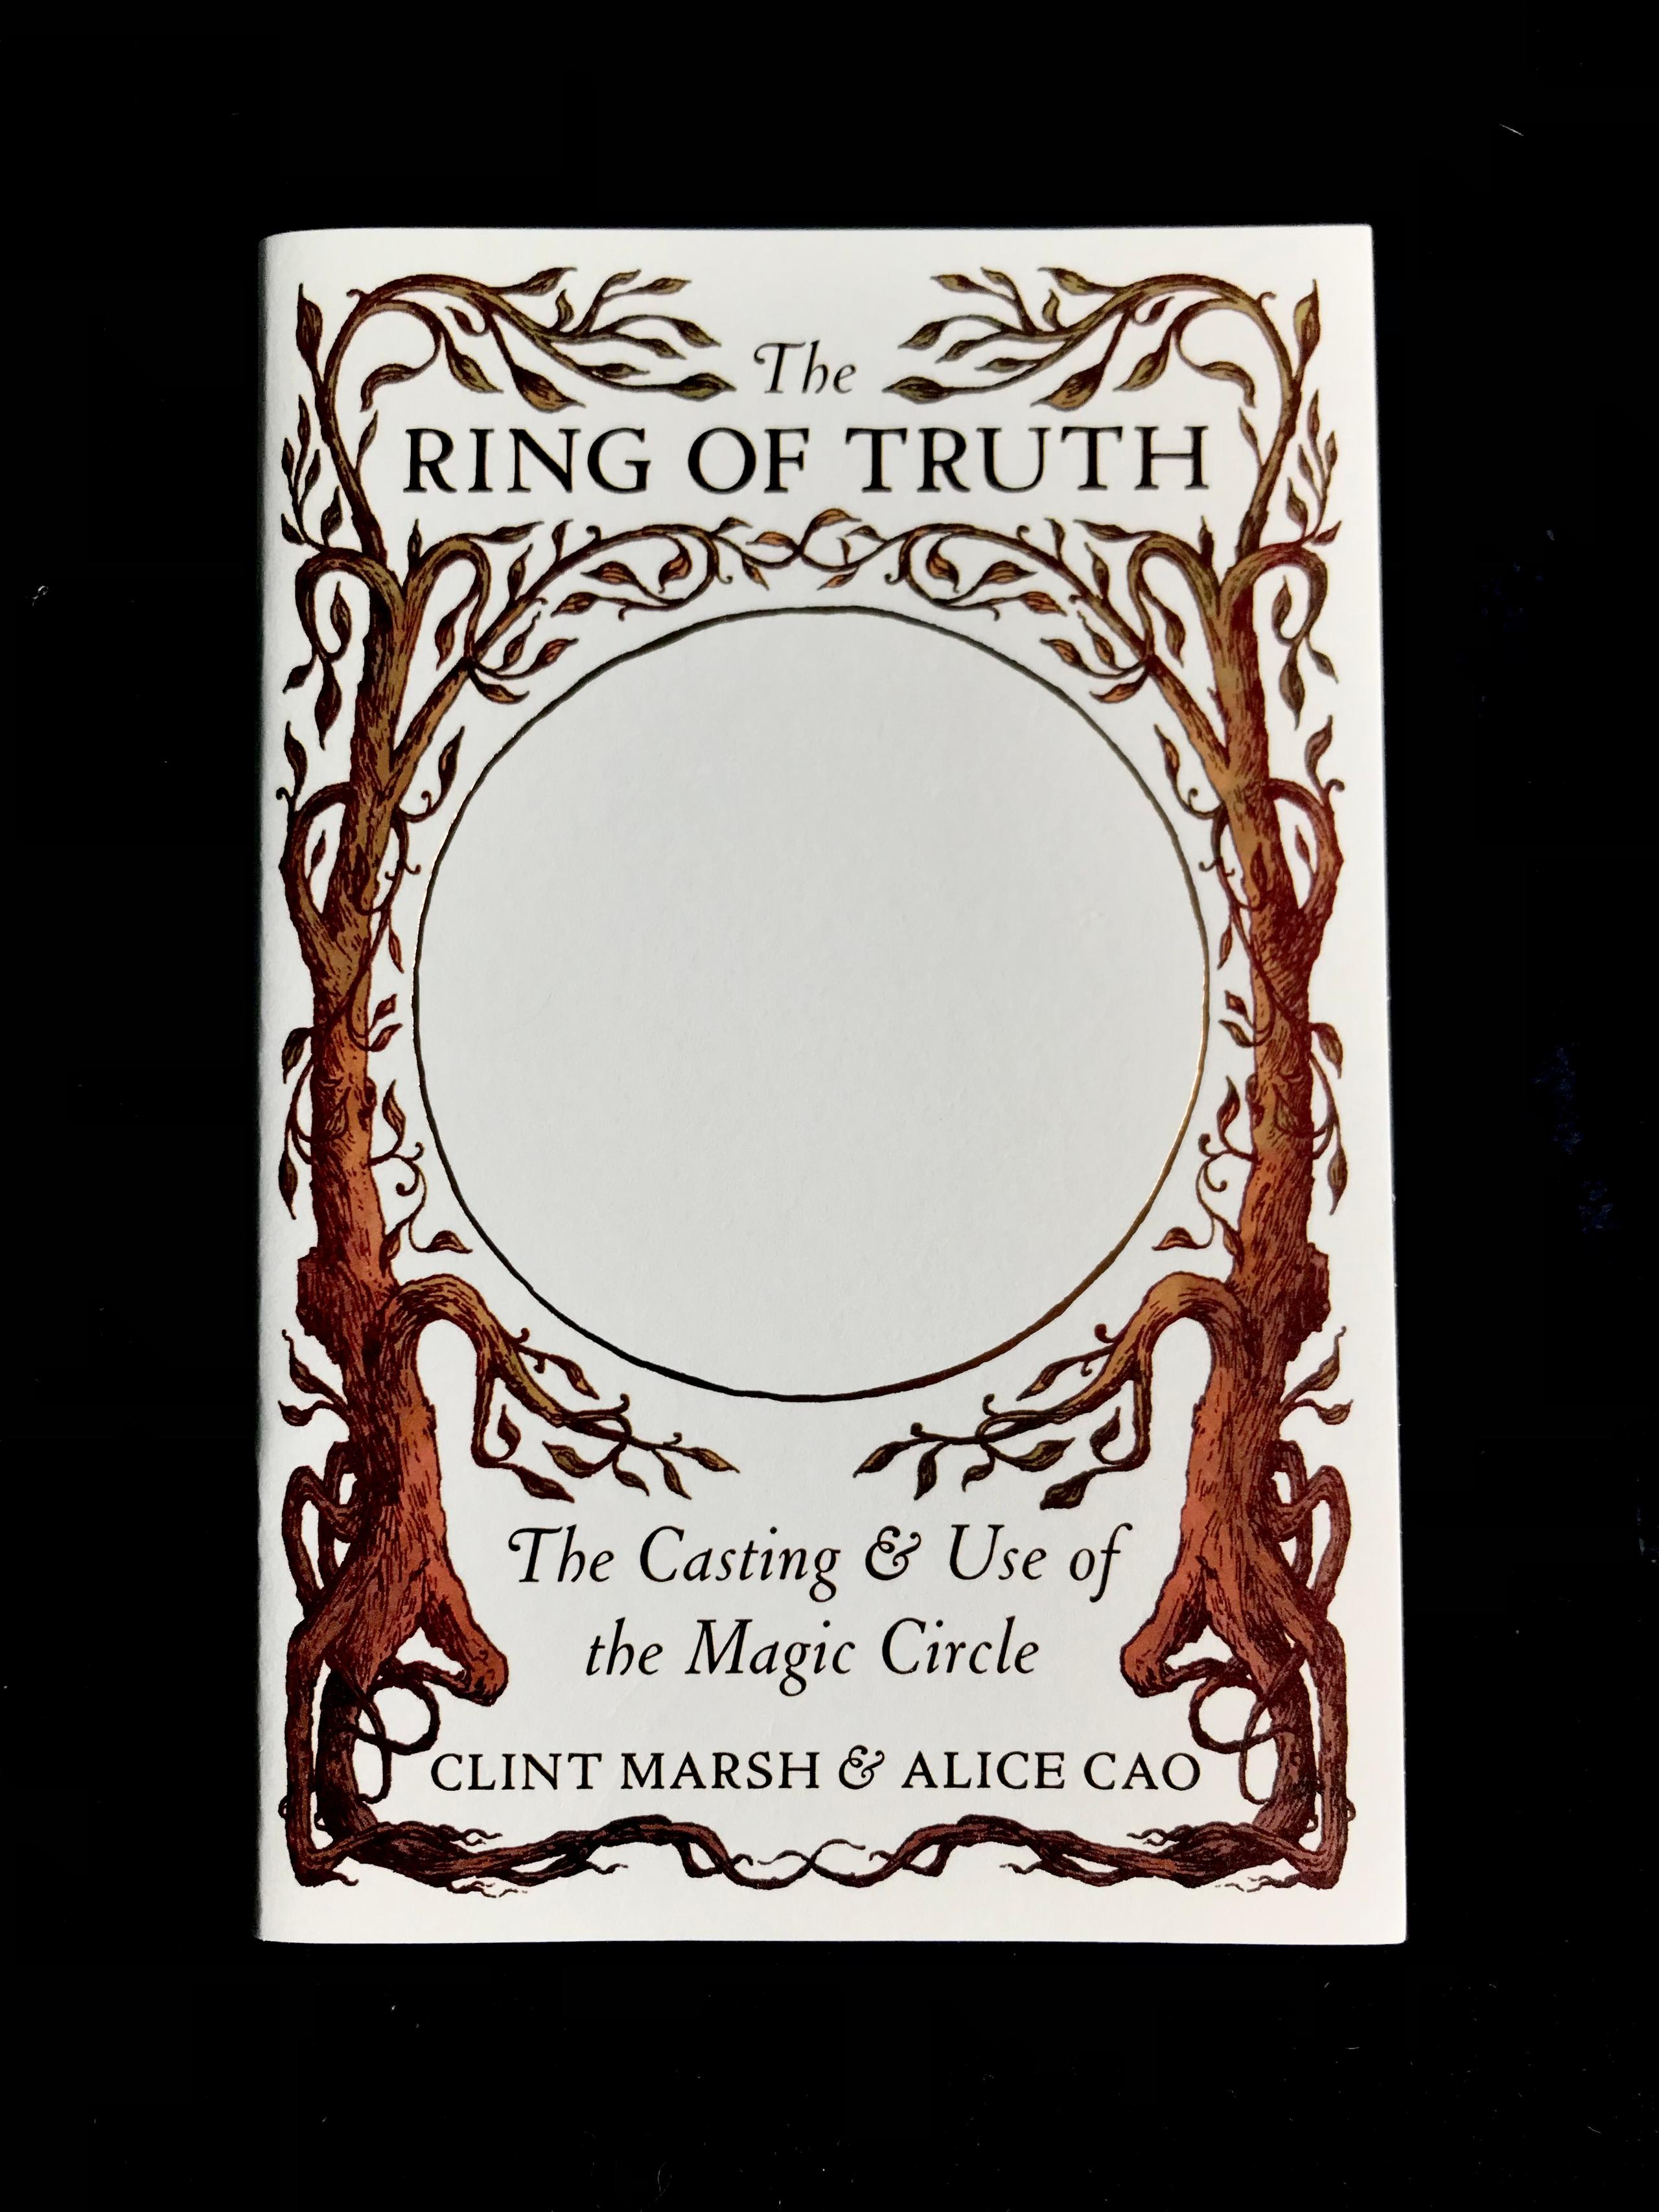 The Ring Of Truth: The Casting and Use of the Magic Circle by Clint Marsh & Alice Cao